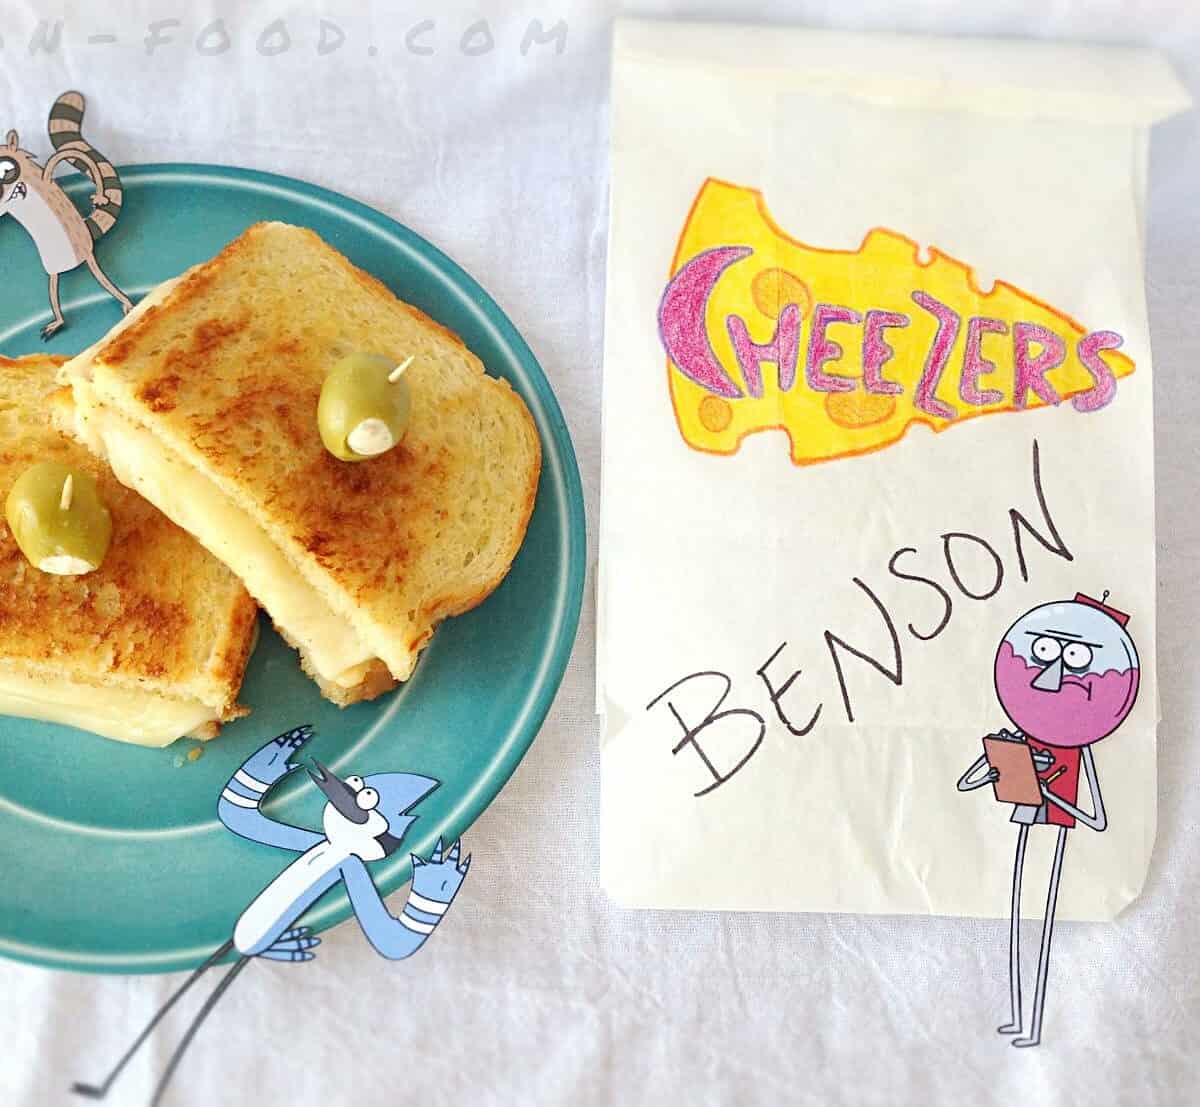  Get ready to treat your taste buds with this delectable grilled cheese sandwich!